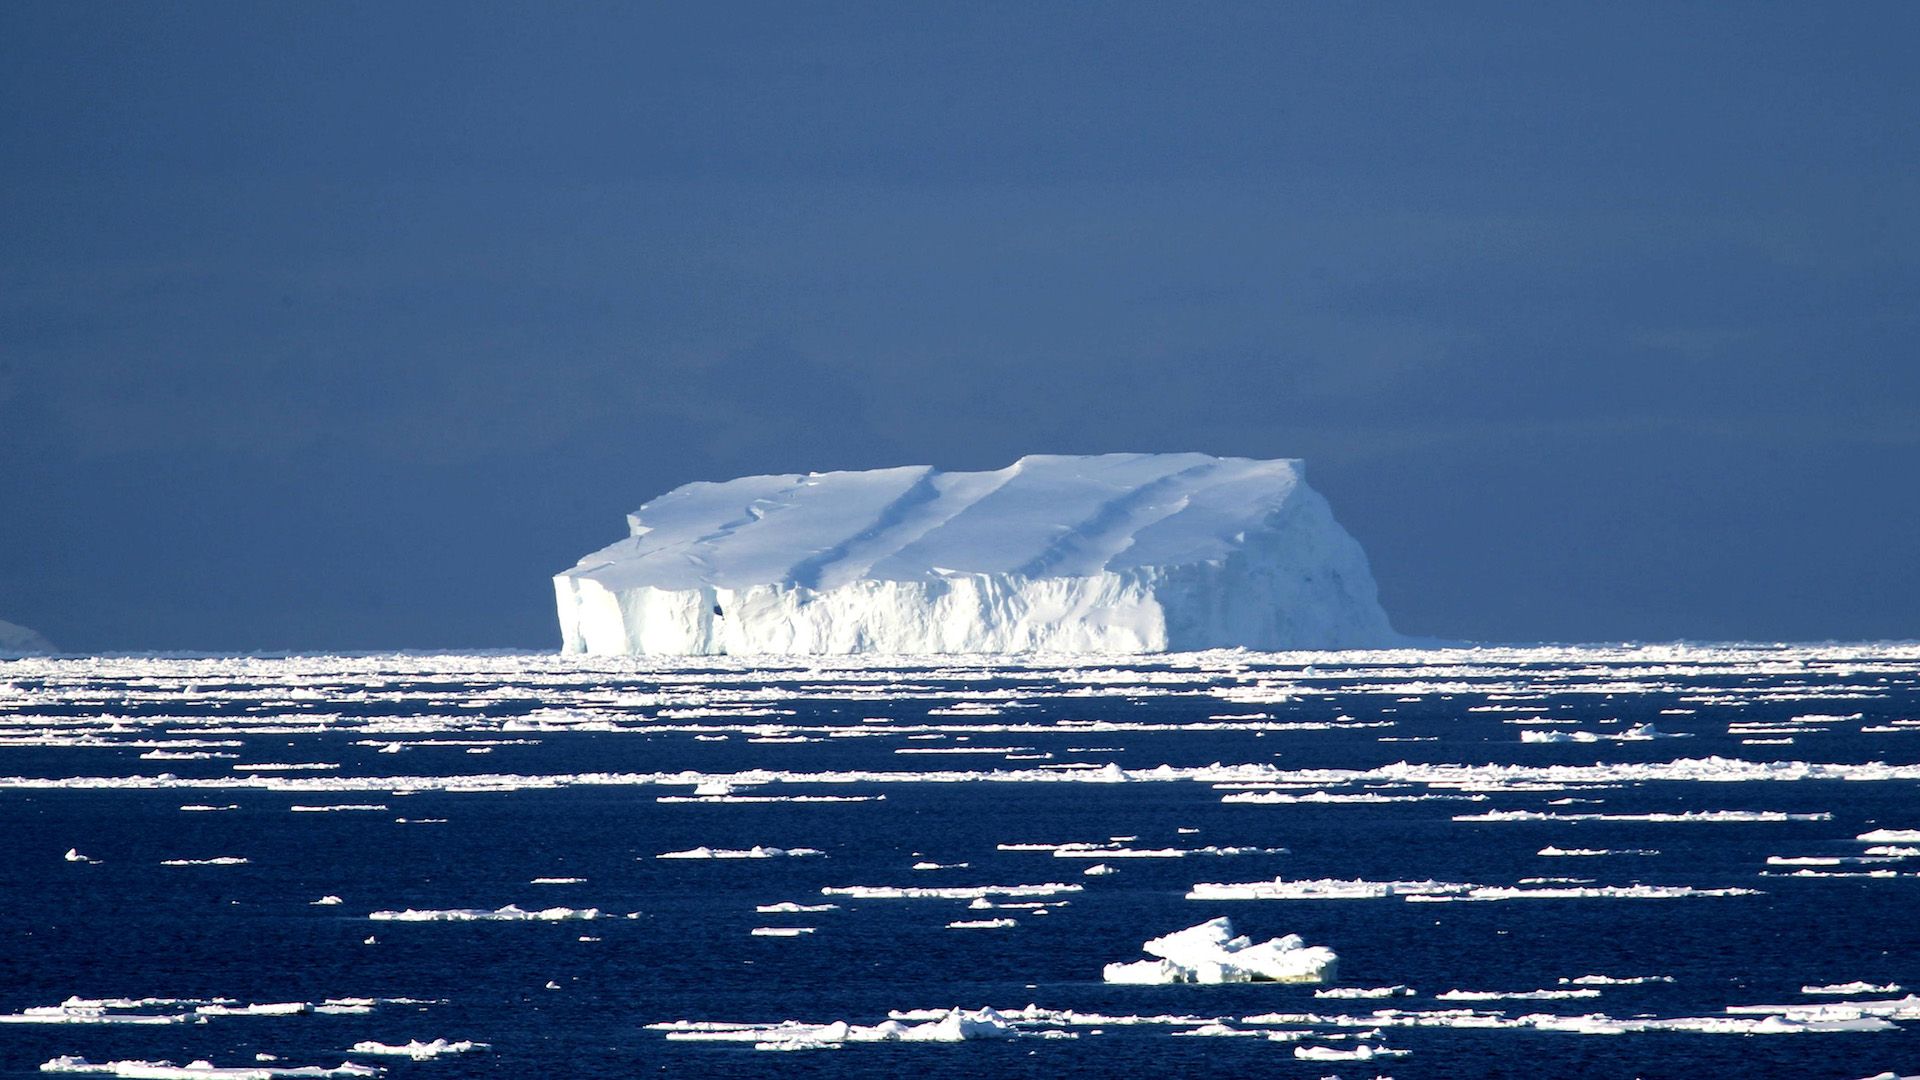 An iceberg in the Southern Ocean.